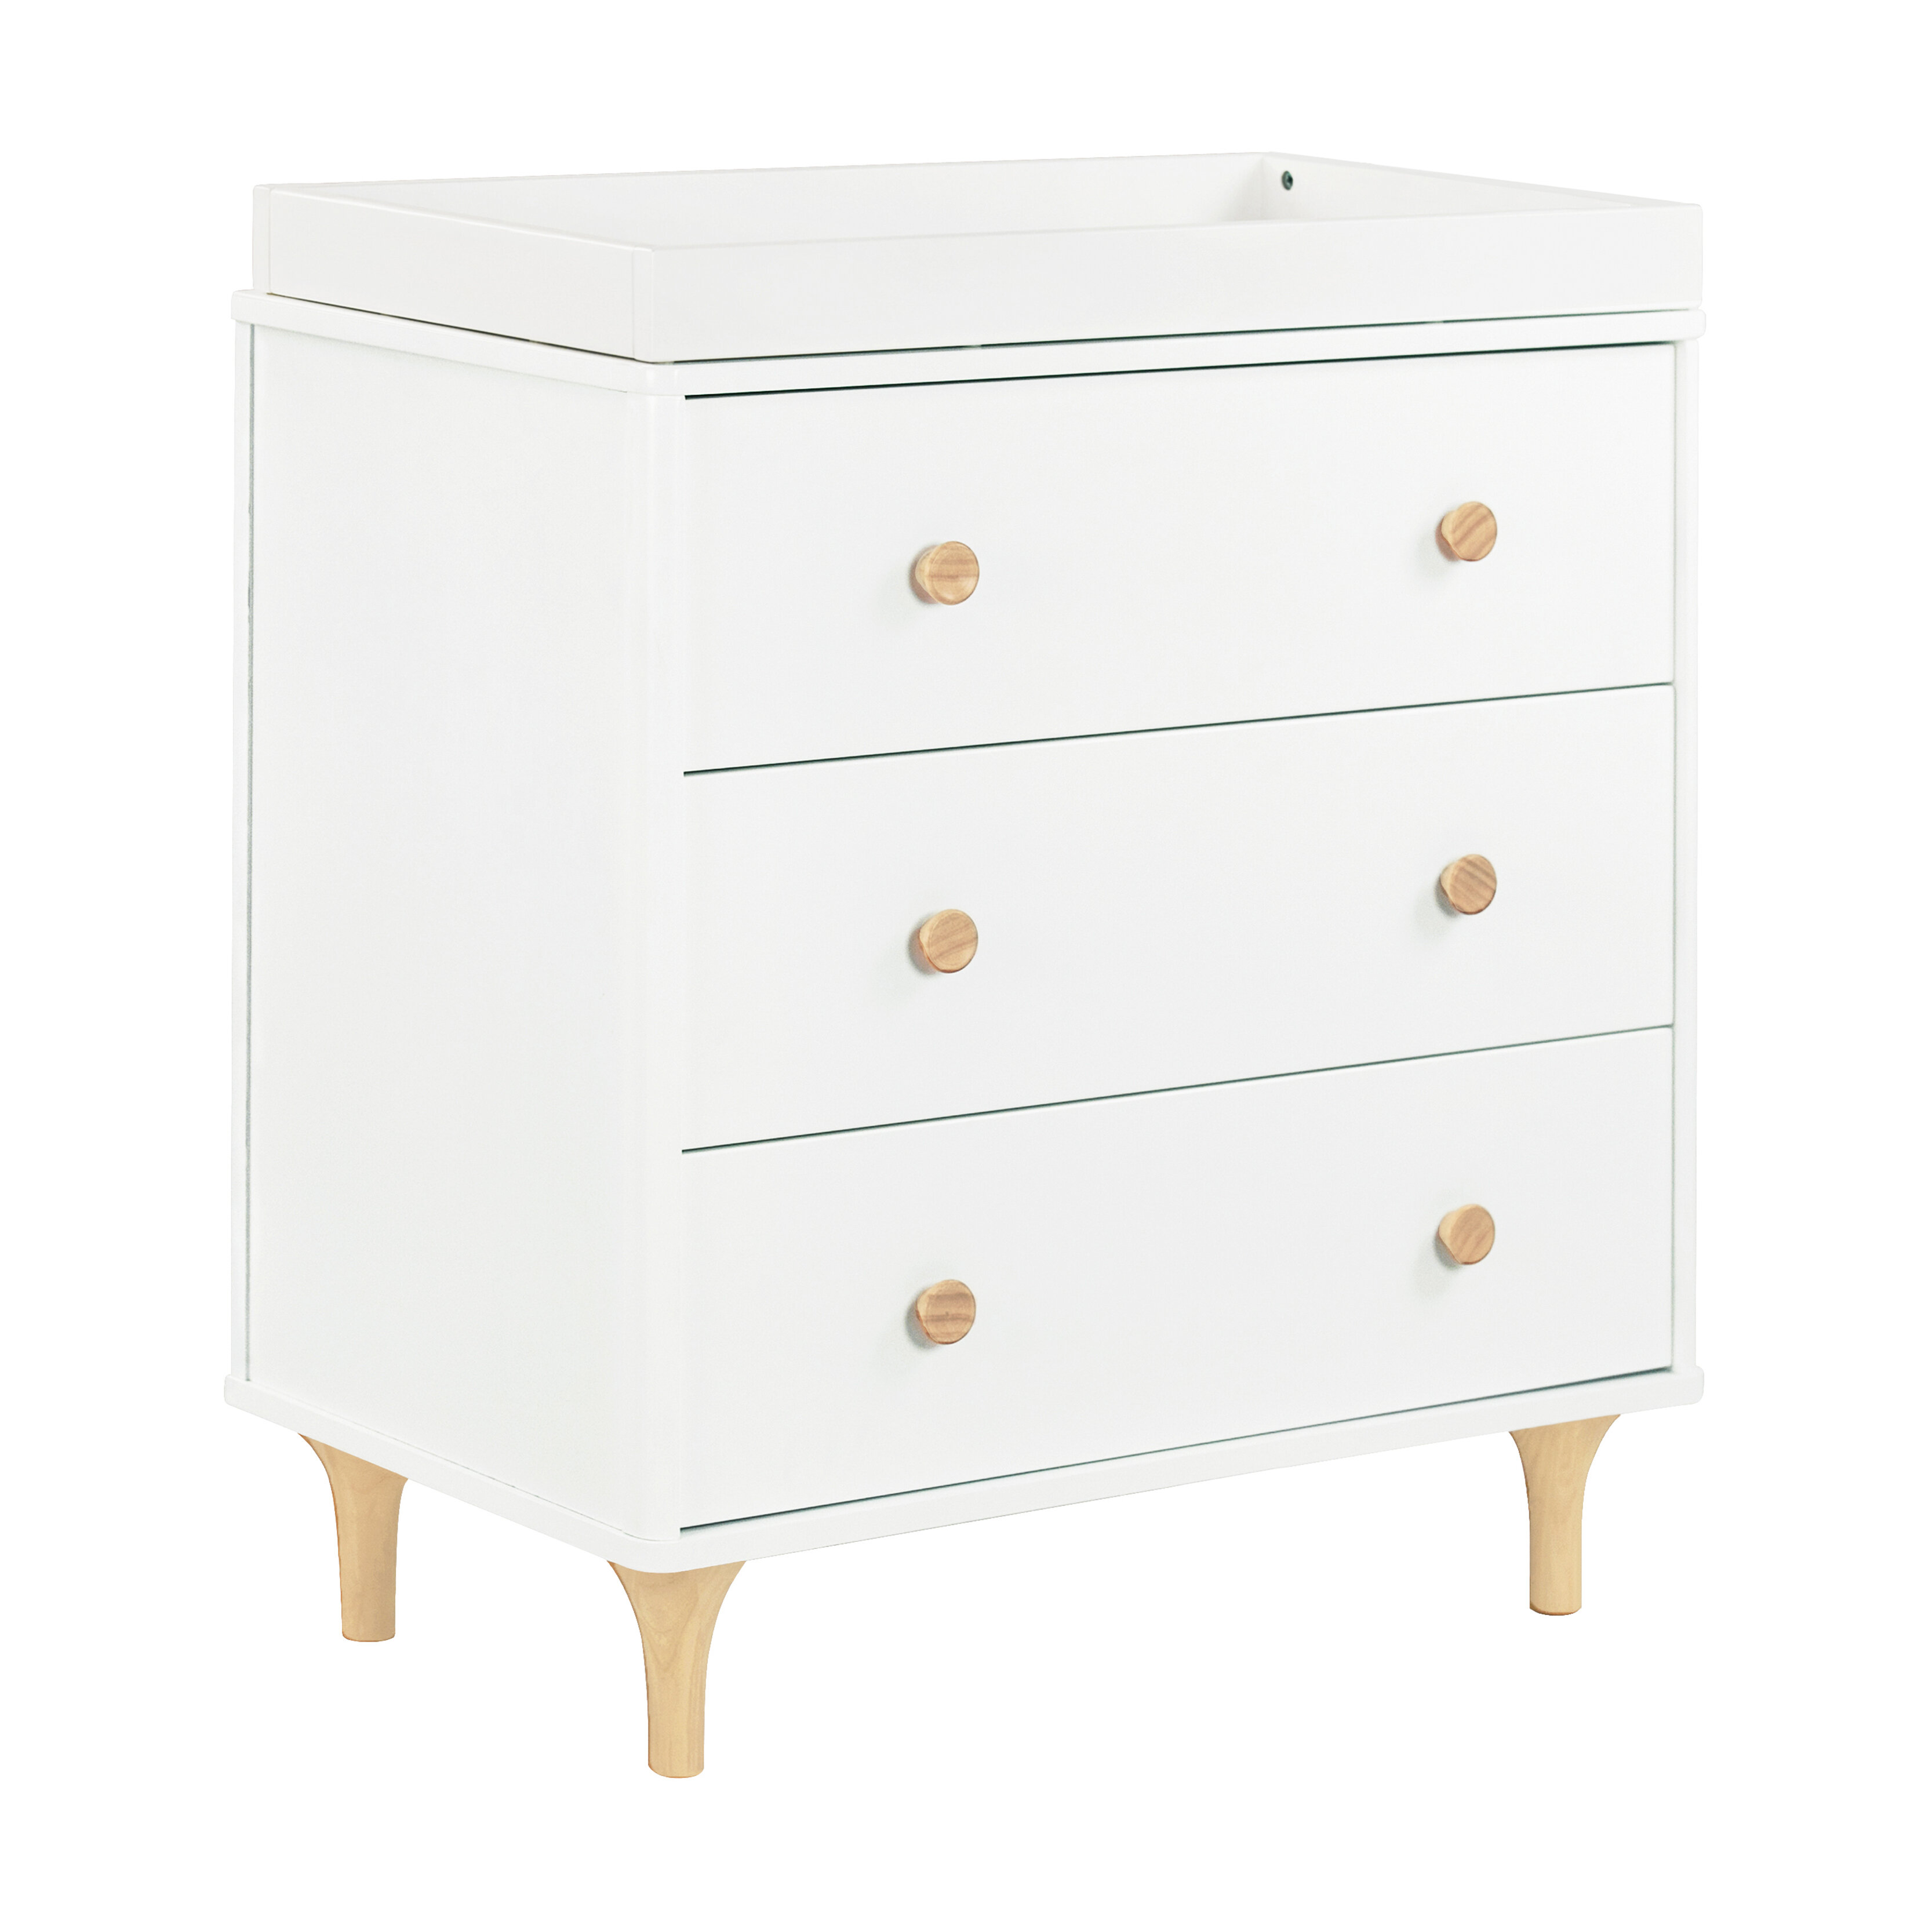 Lolly Changing Table Dresser \u0026 Reviews 